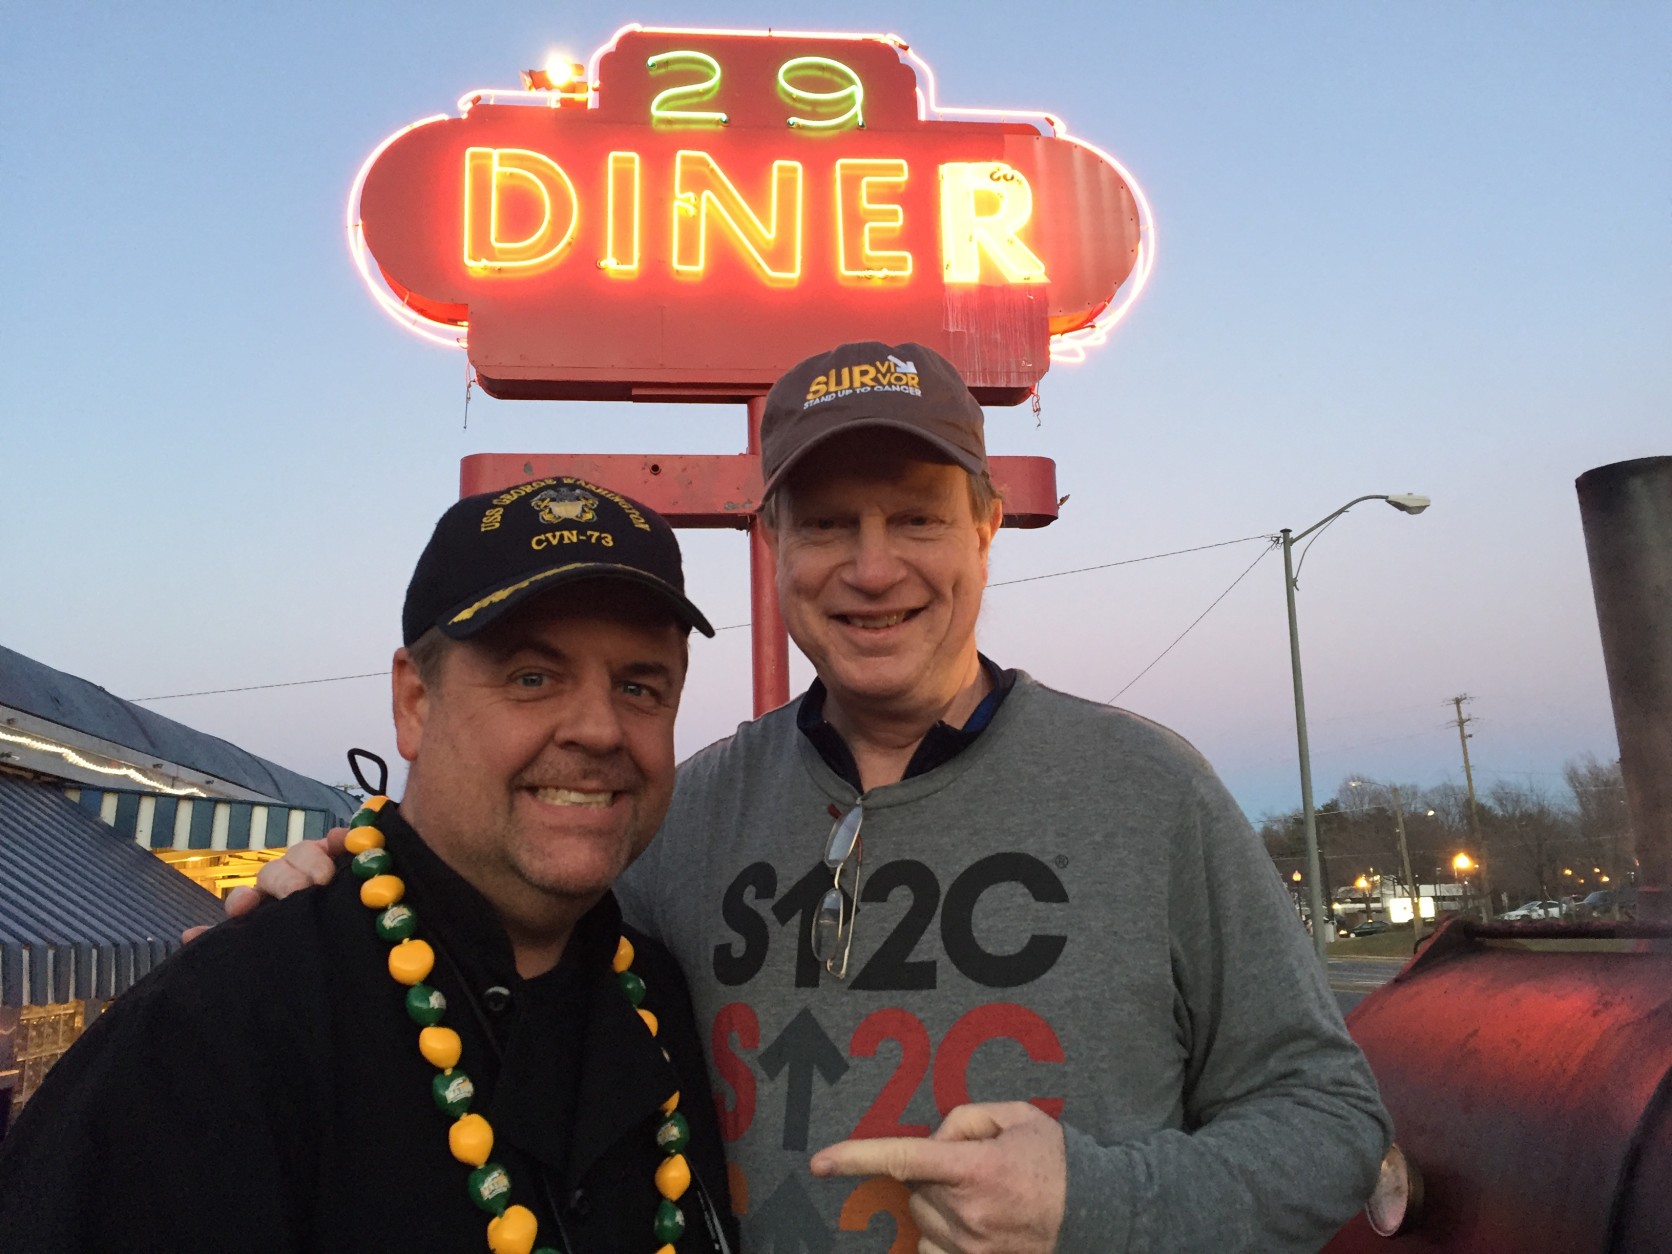 The owner of 29 Diner, John Wood (left), with friend and cancer survivor Pat Malone. (WTOP/Michelle Basch)